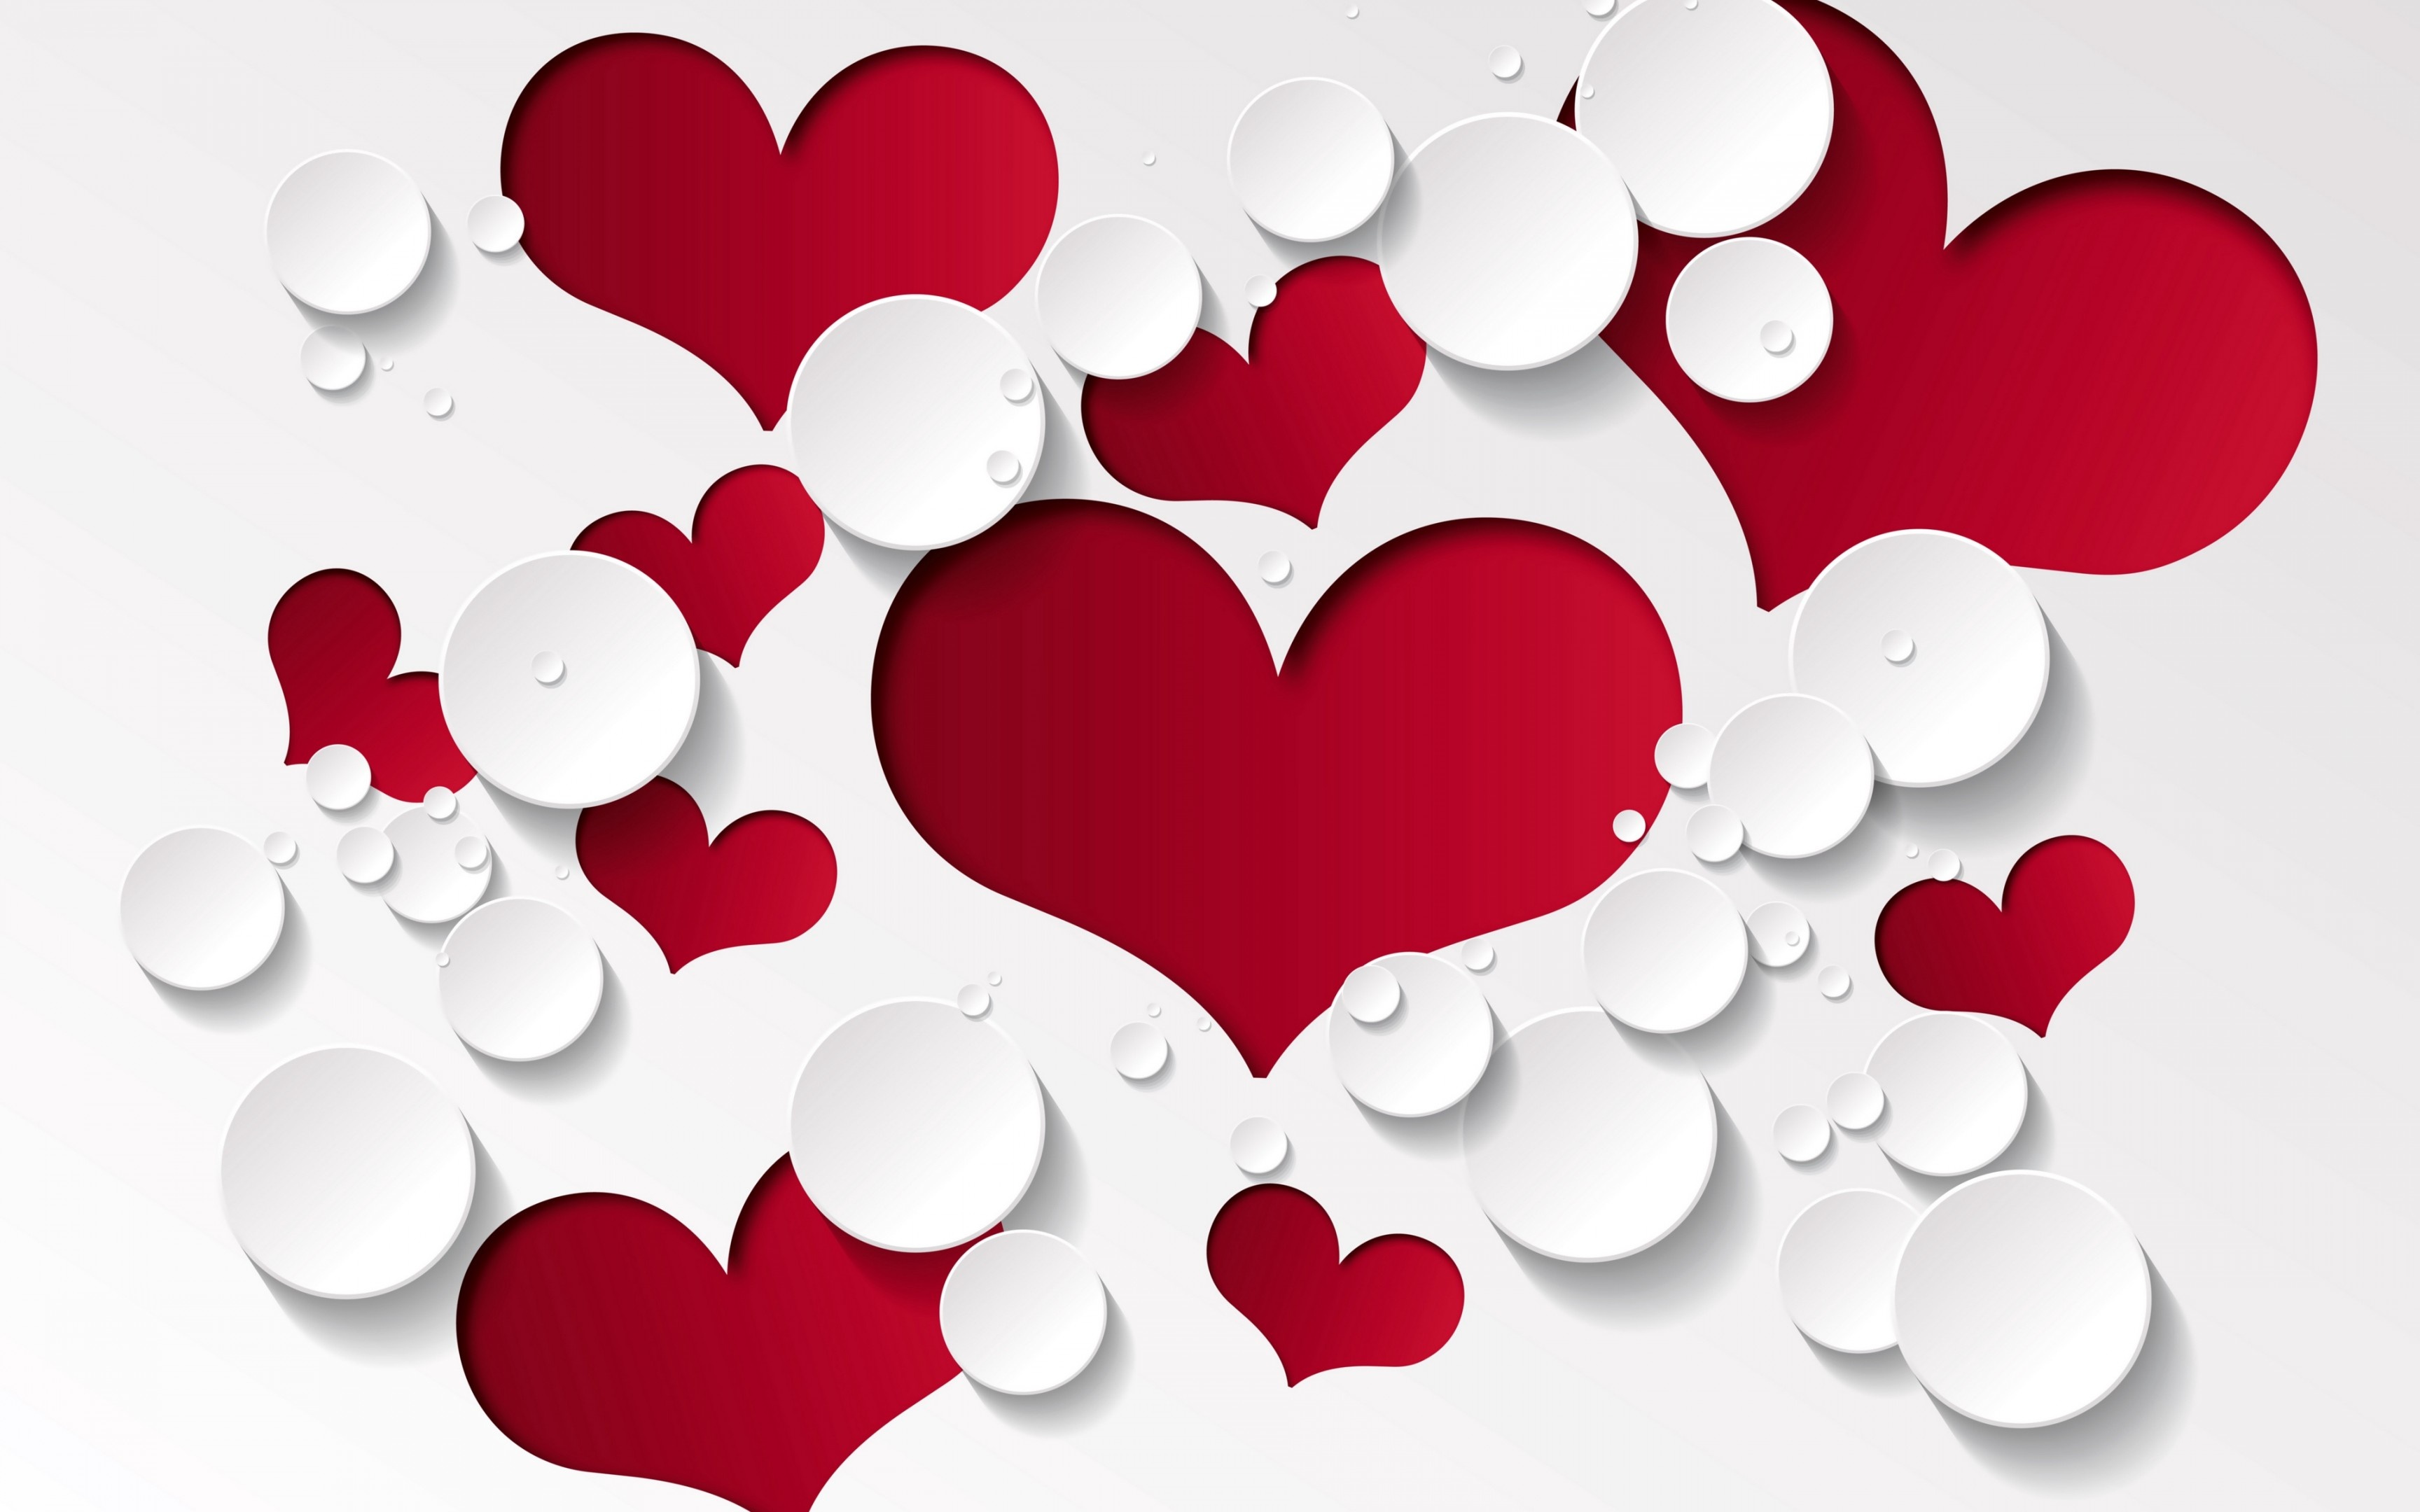 Heart Shape, Red and white pattern, Love-themed background, Romantic symbol, 3460x2160 HD Desktop